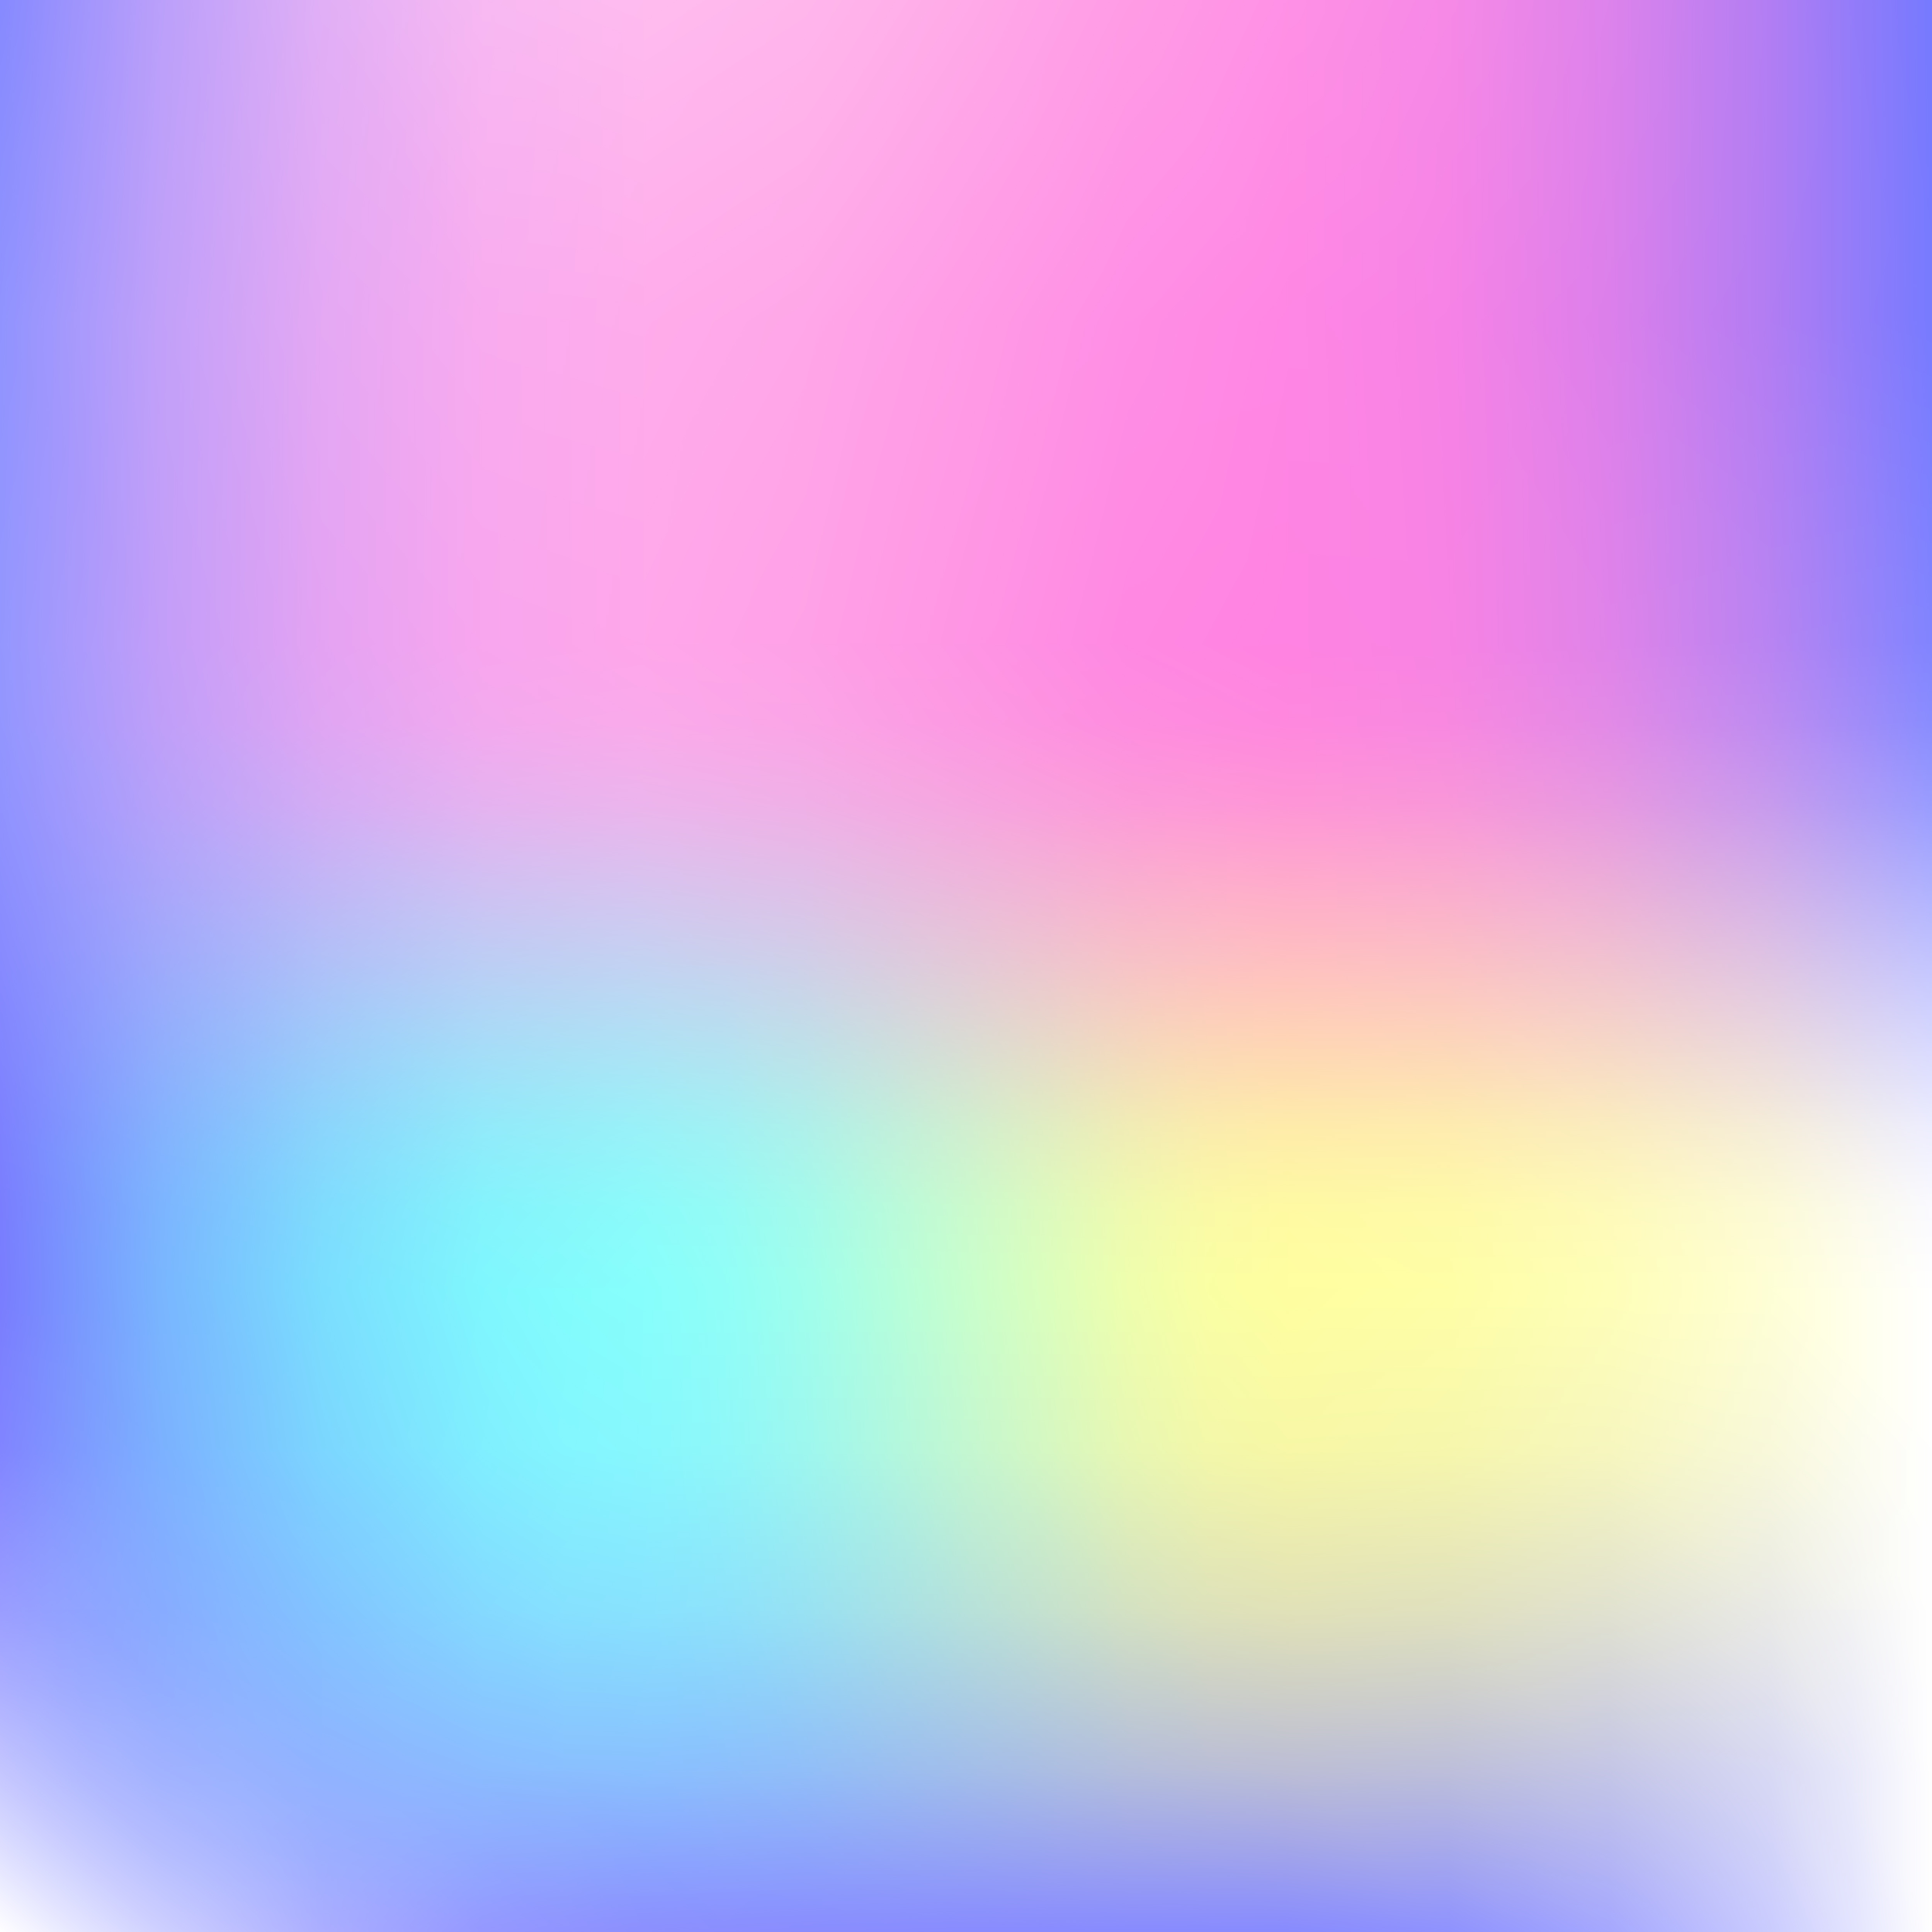 Abstract blur gradient background with trend pastel pink, purple, violet, yellow and blue colors for deign concepts, wallpaper, web, presentations and prints. Vector illustration